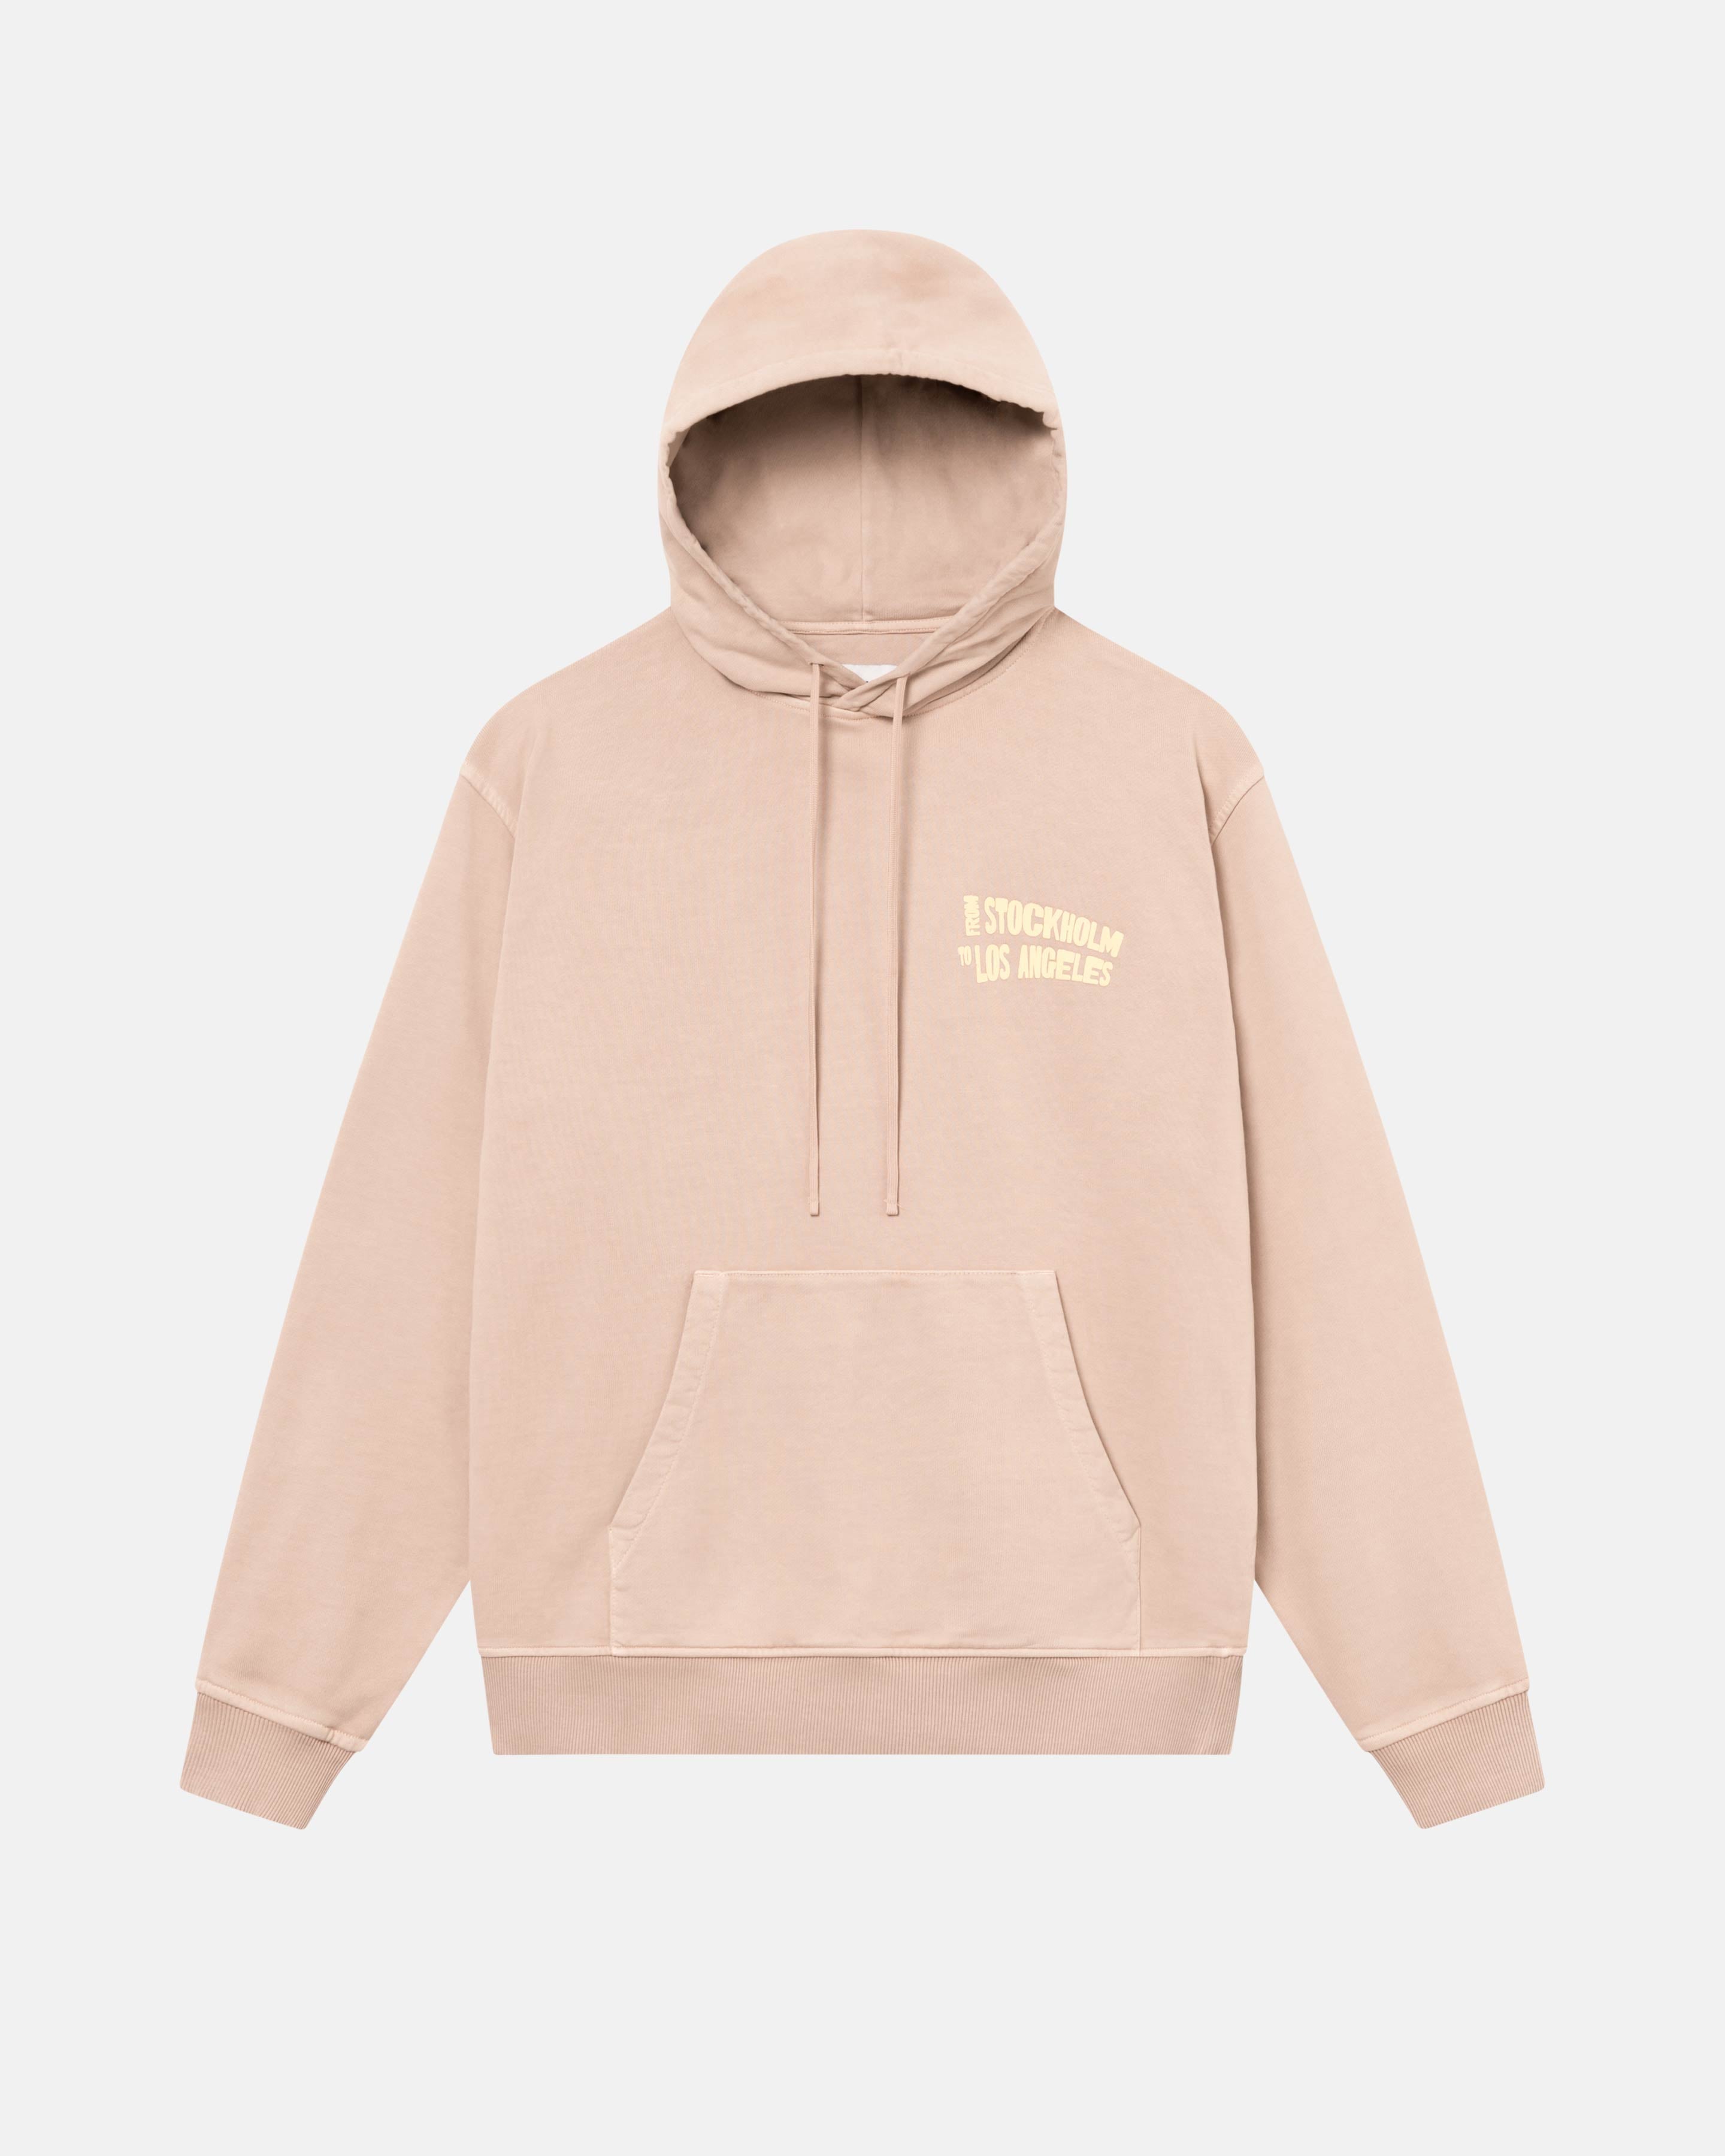 Close up of a brown hoodie with a yellow text print on its chest